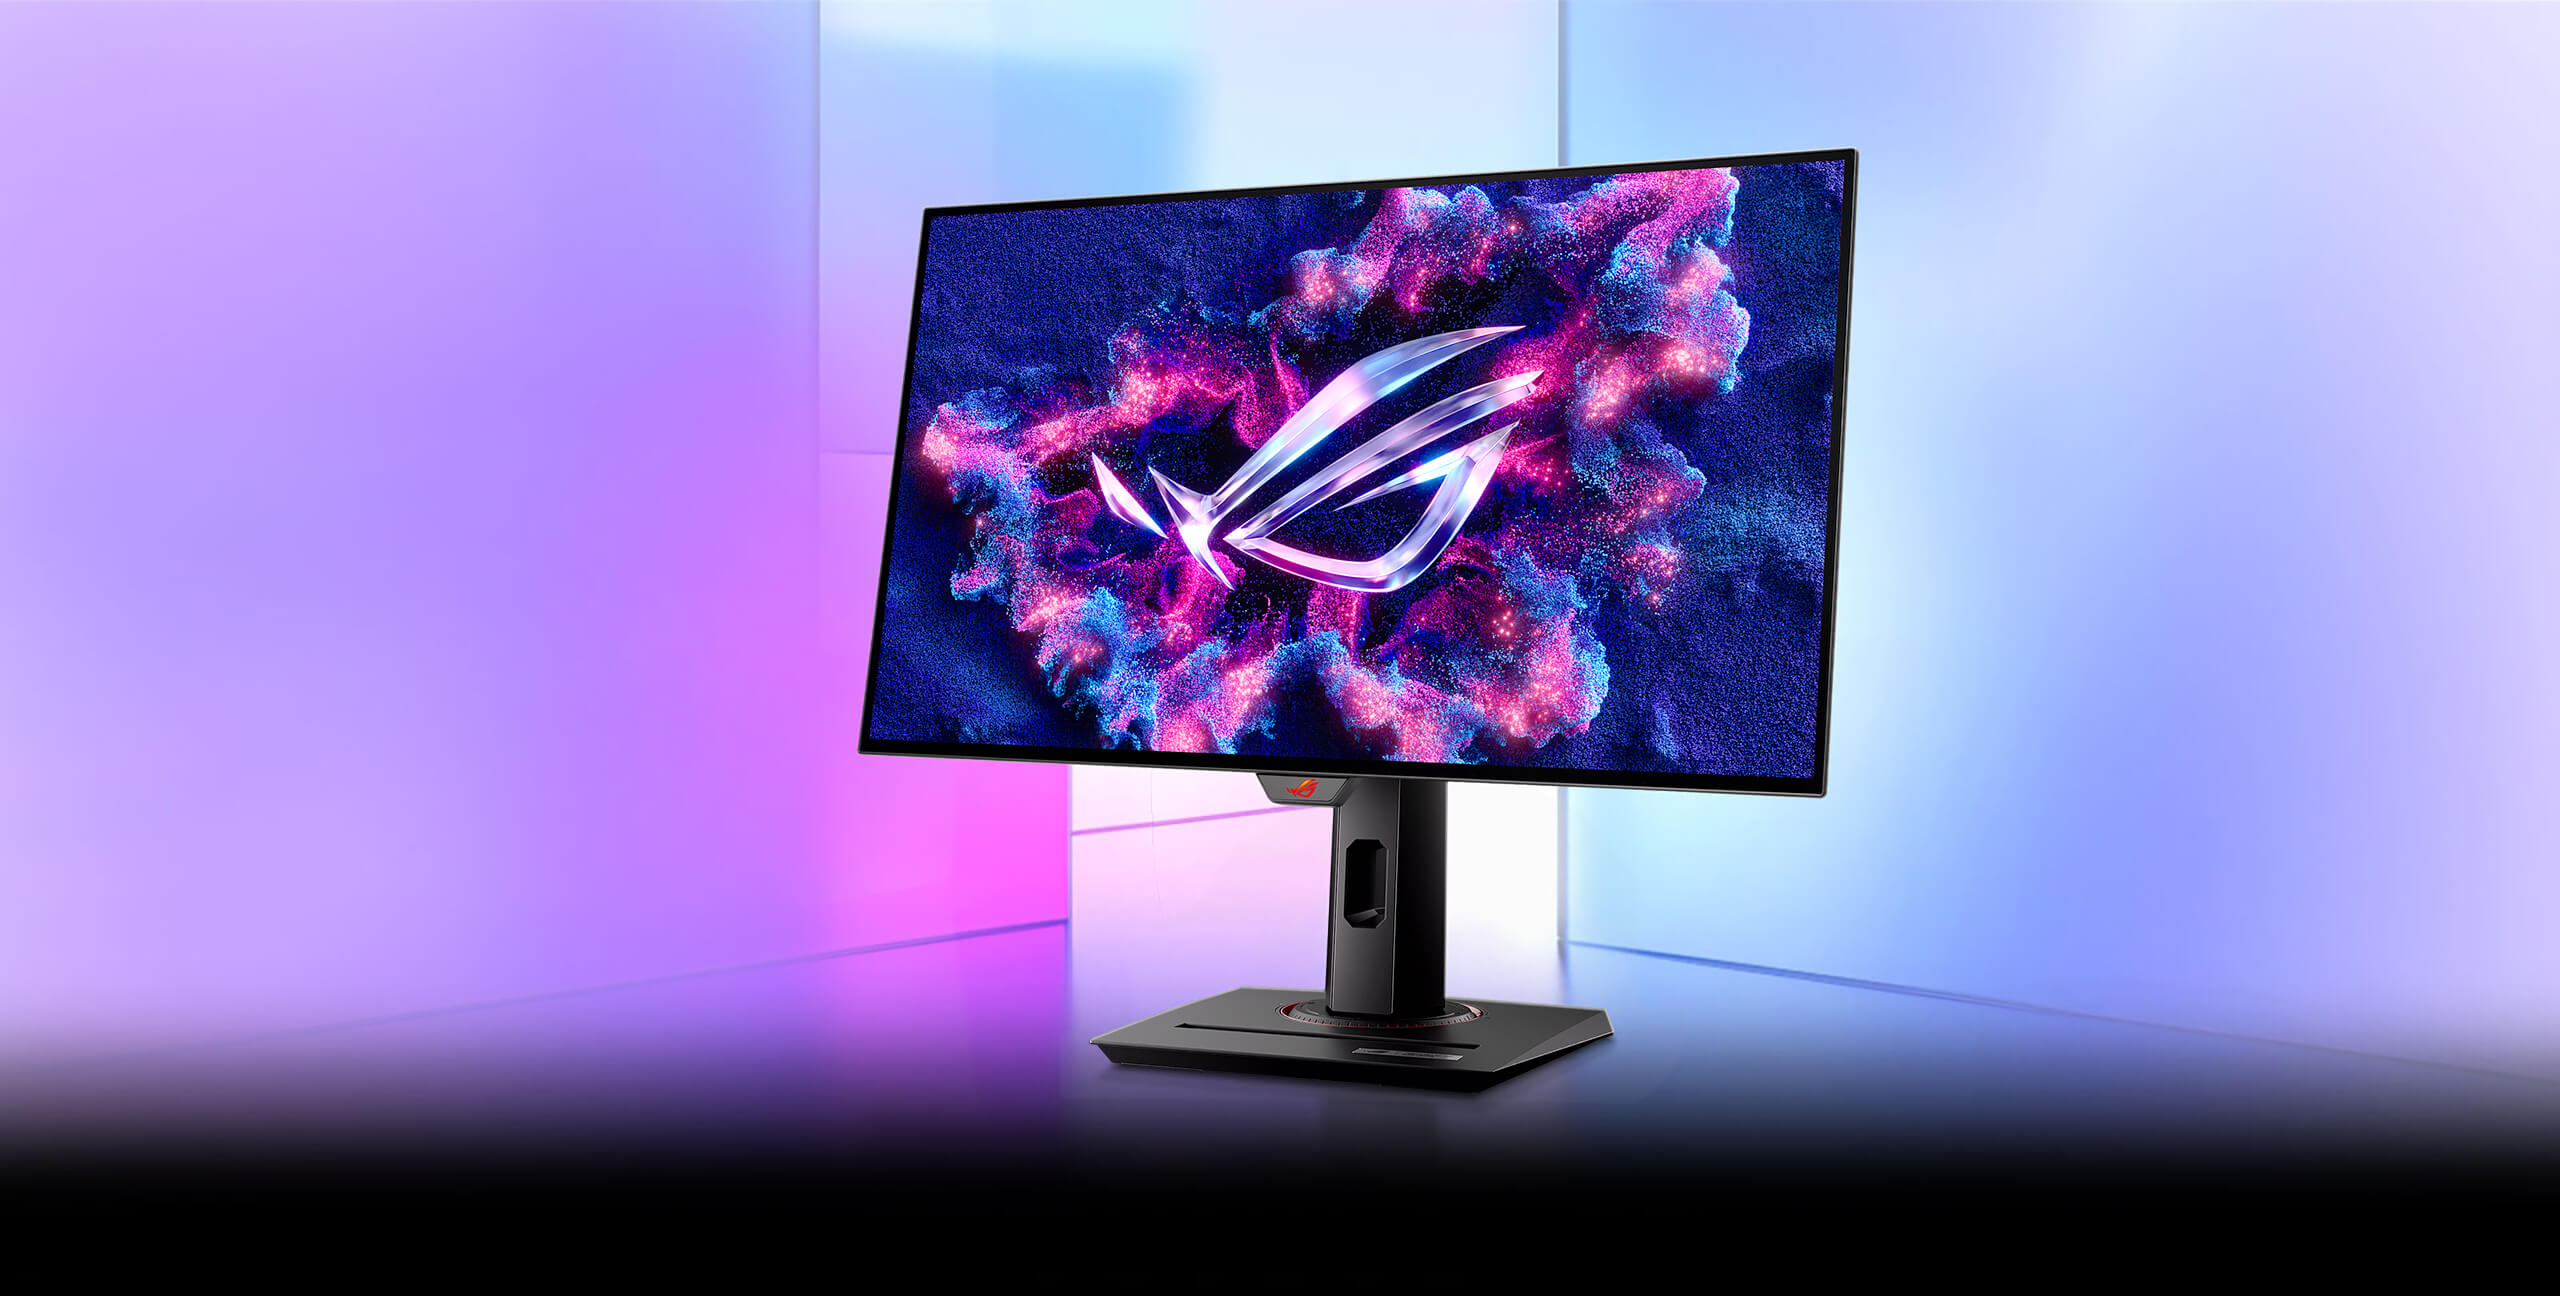 The XG27AQDMG monitor displayed in front of a colorful, glass-textured background.